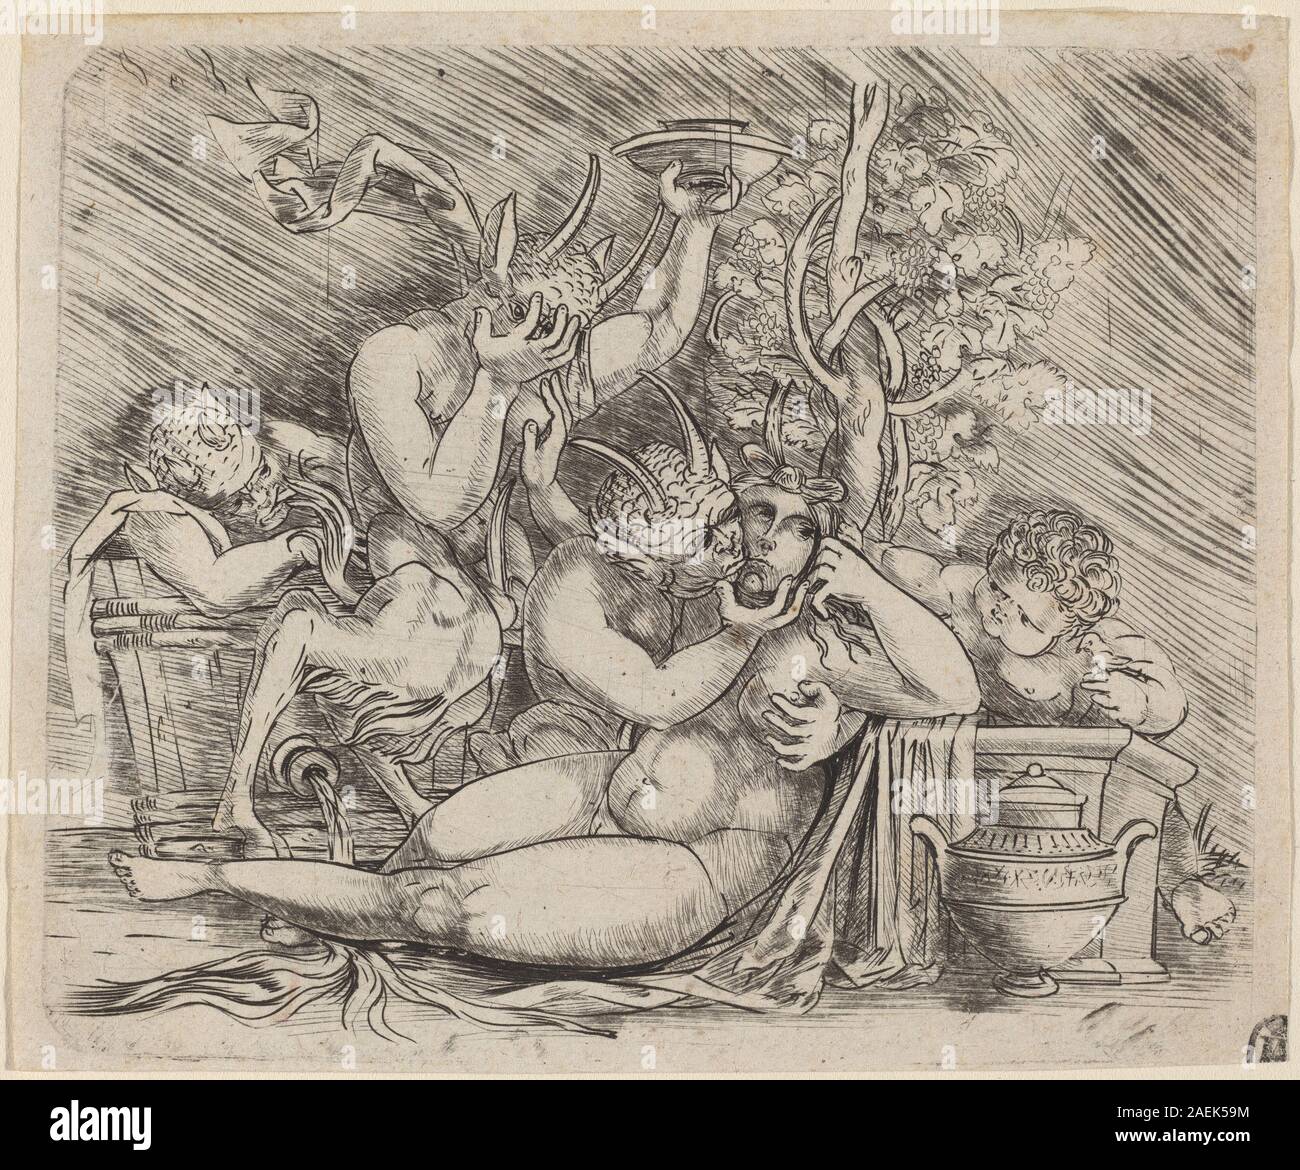 Master of 1515, Bacchanalian Scene with Satyrs and a Maenad, c 1515 Bacchanalian Scene with Satyrs and a Maenad; circa 1515 date Stock Photo